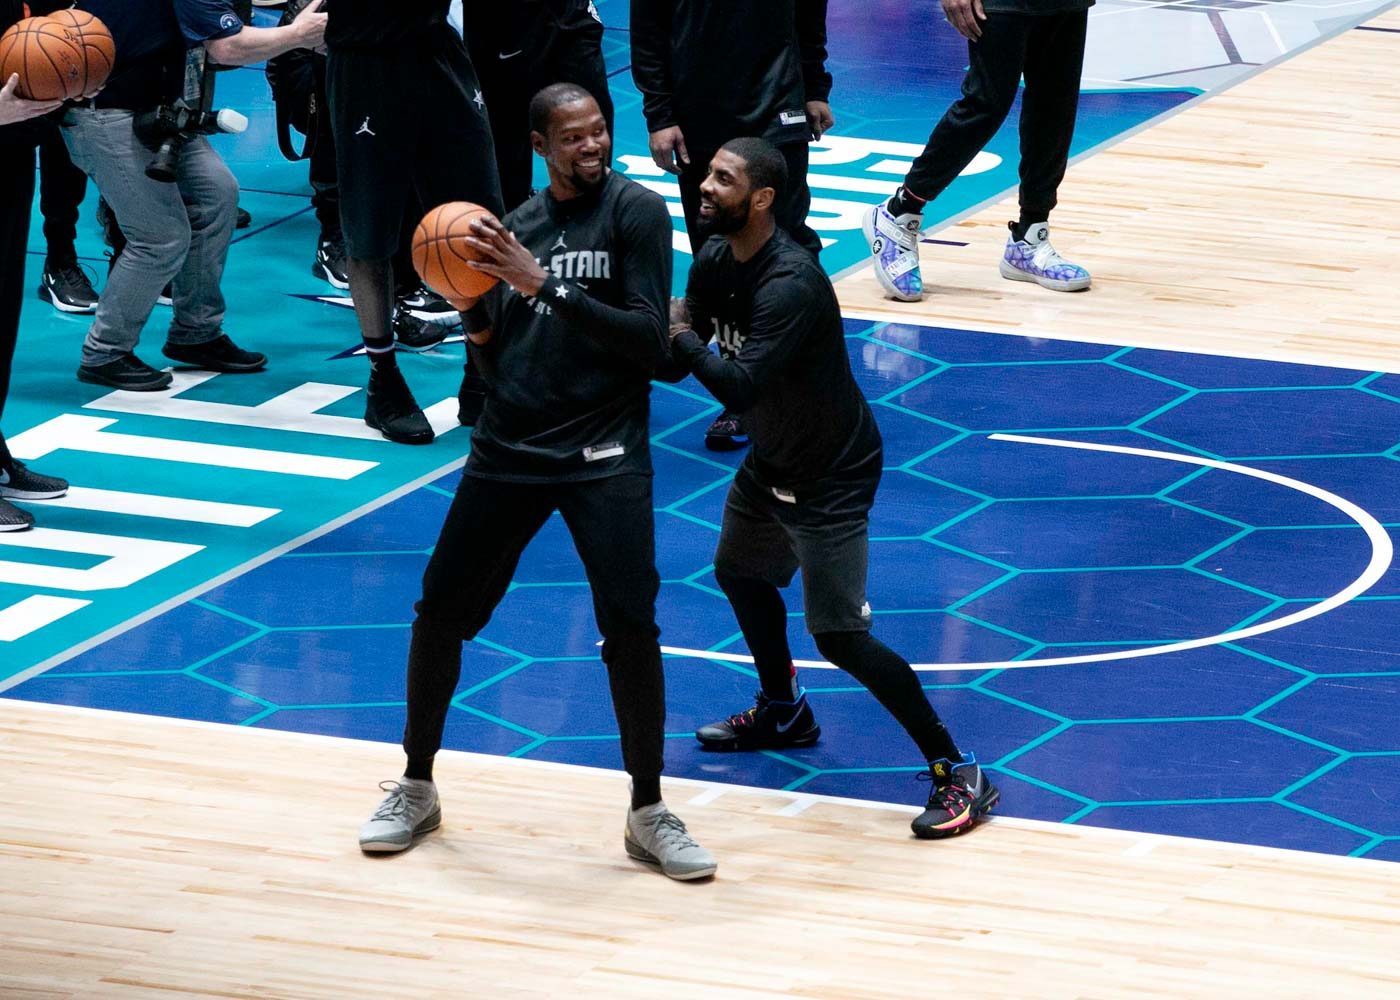 FACE OFF. Golden State’s Kevin Durant and Boston’s Kyrie Irving always seem to challenge each other in one-on-one duels during lulls in practice.
 